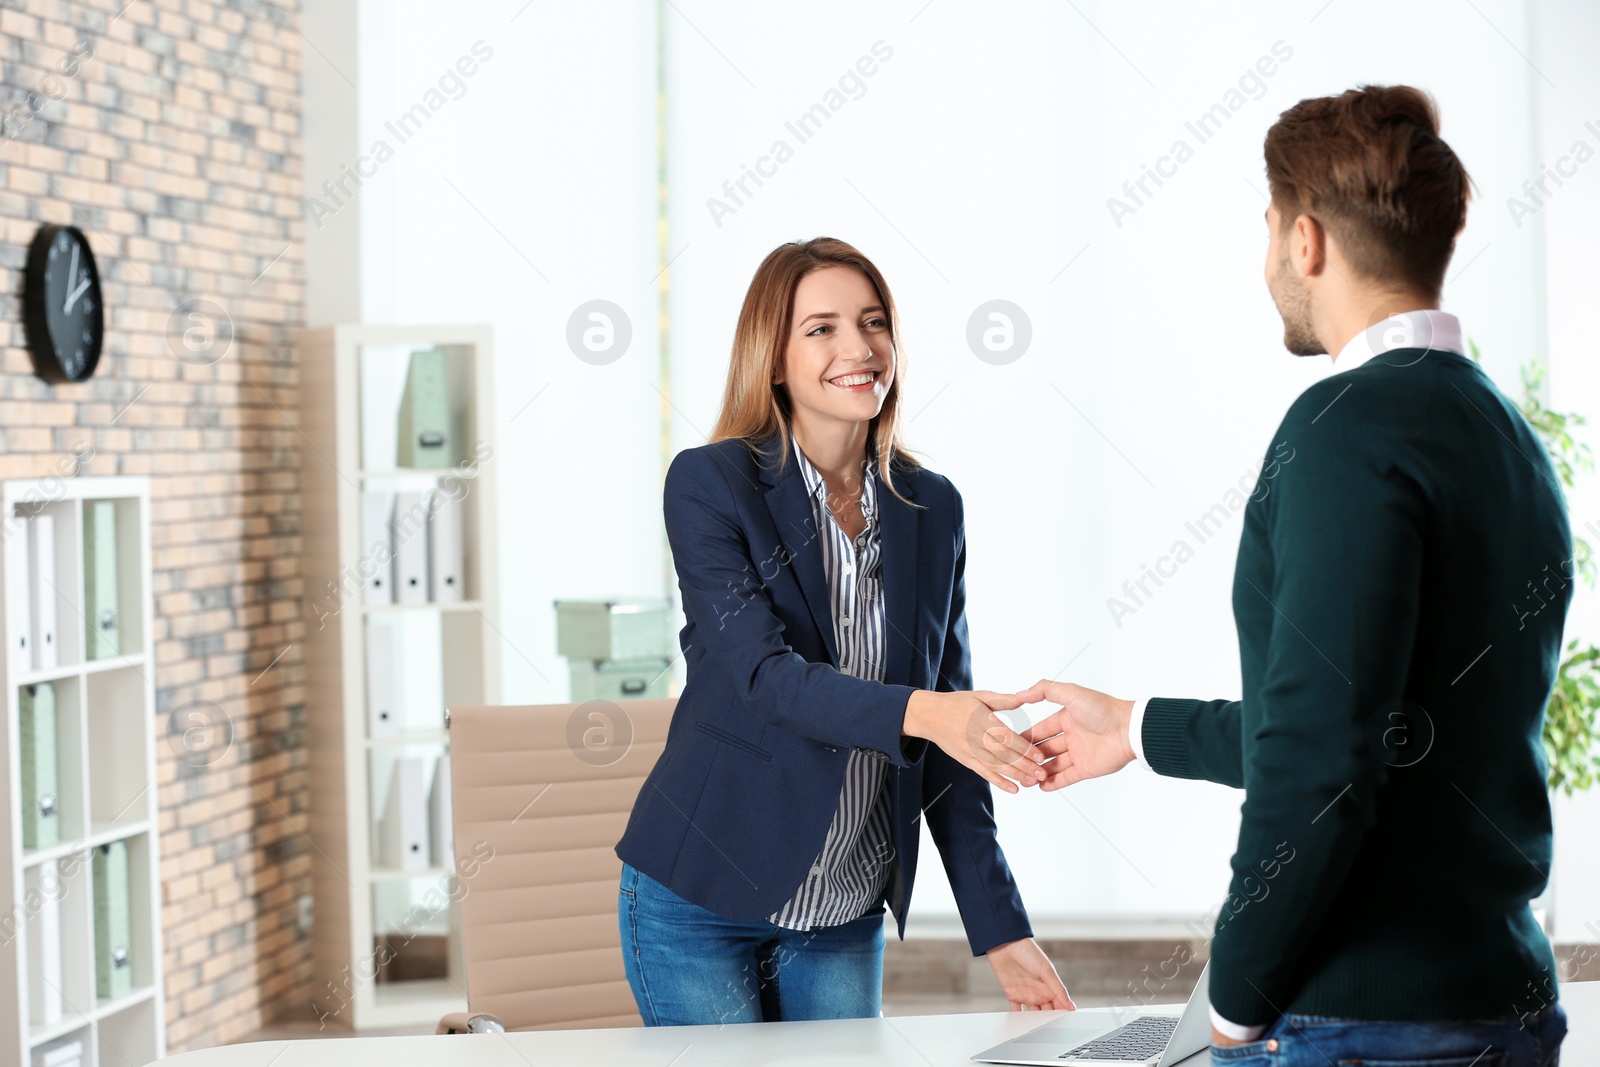 Photo of Human resources manager shaking hands with applicant before job interview in office